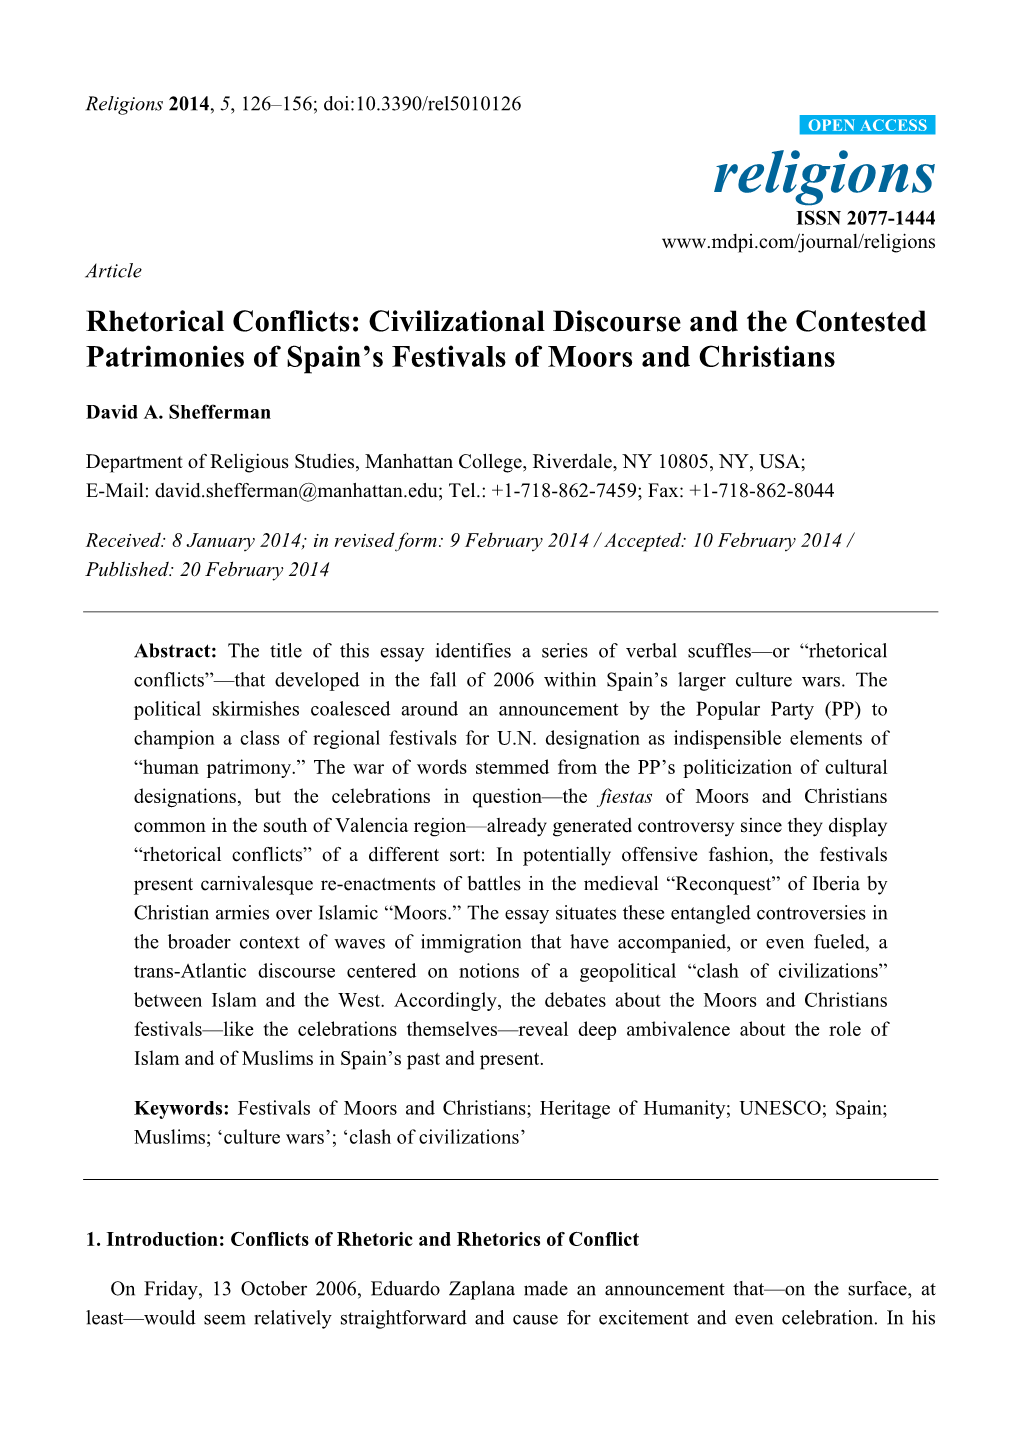 Civilizational Discourse and the Contested Patrimonies of Spain’S Festivals of Moors and Christians